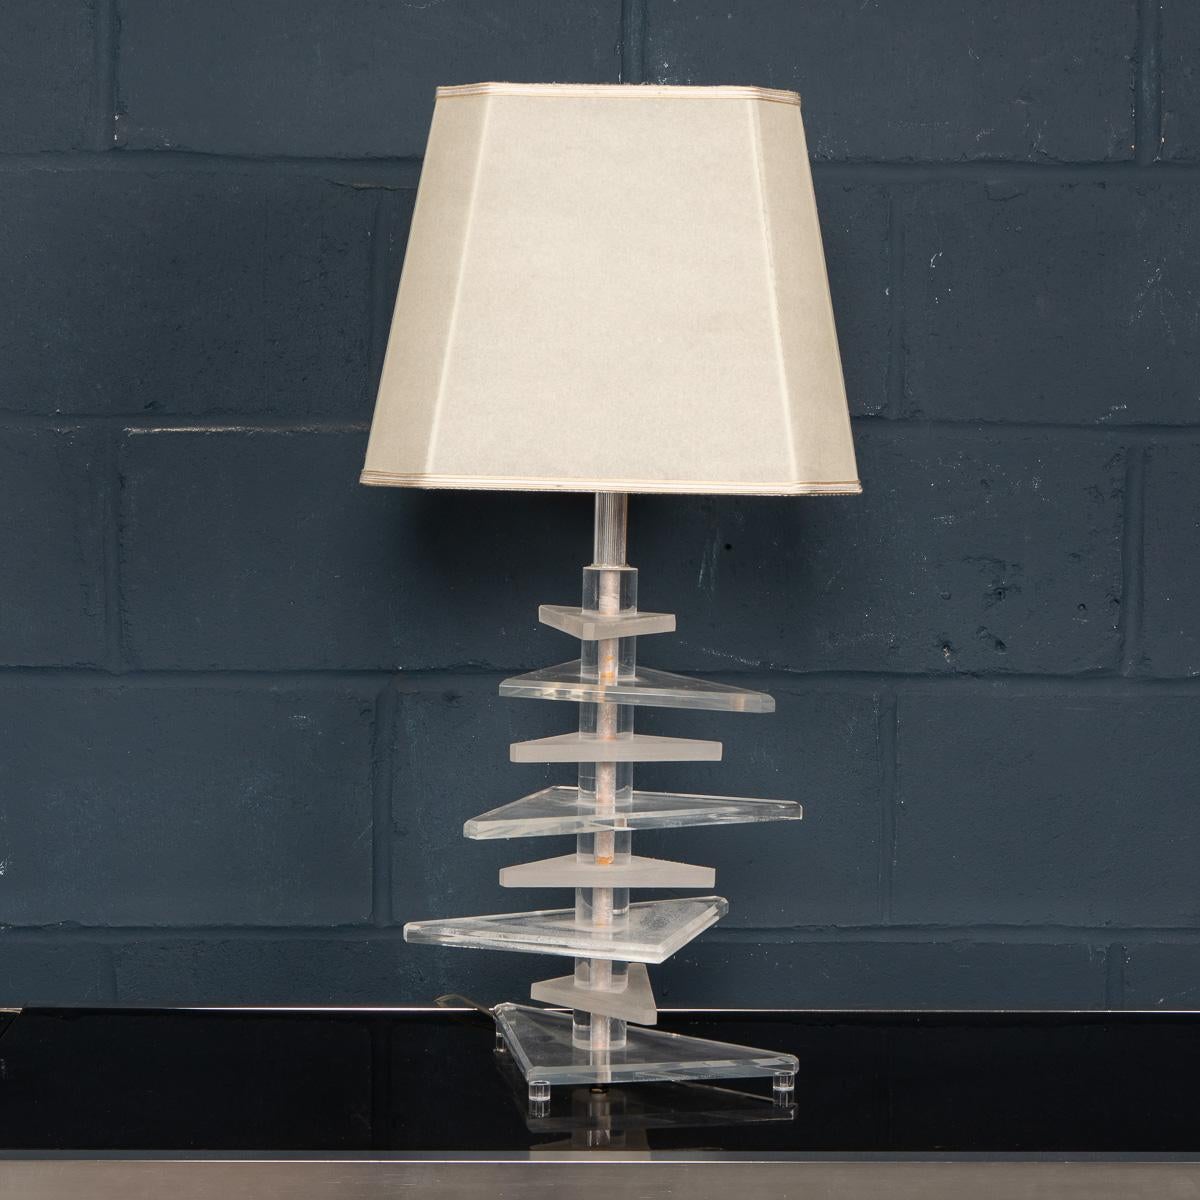 Mid-20th Century American Made Stacked Lucite Table Lamps In Good Condition For Sale In Royal Tunbridge Wells, Kent